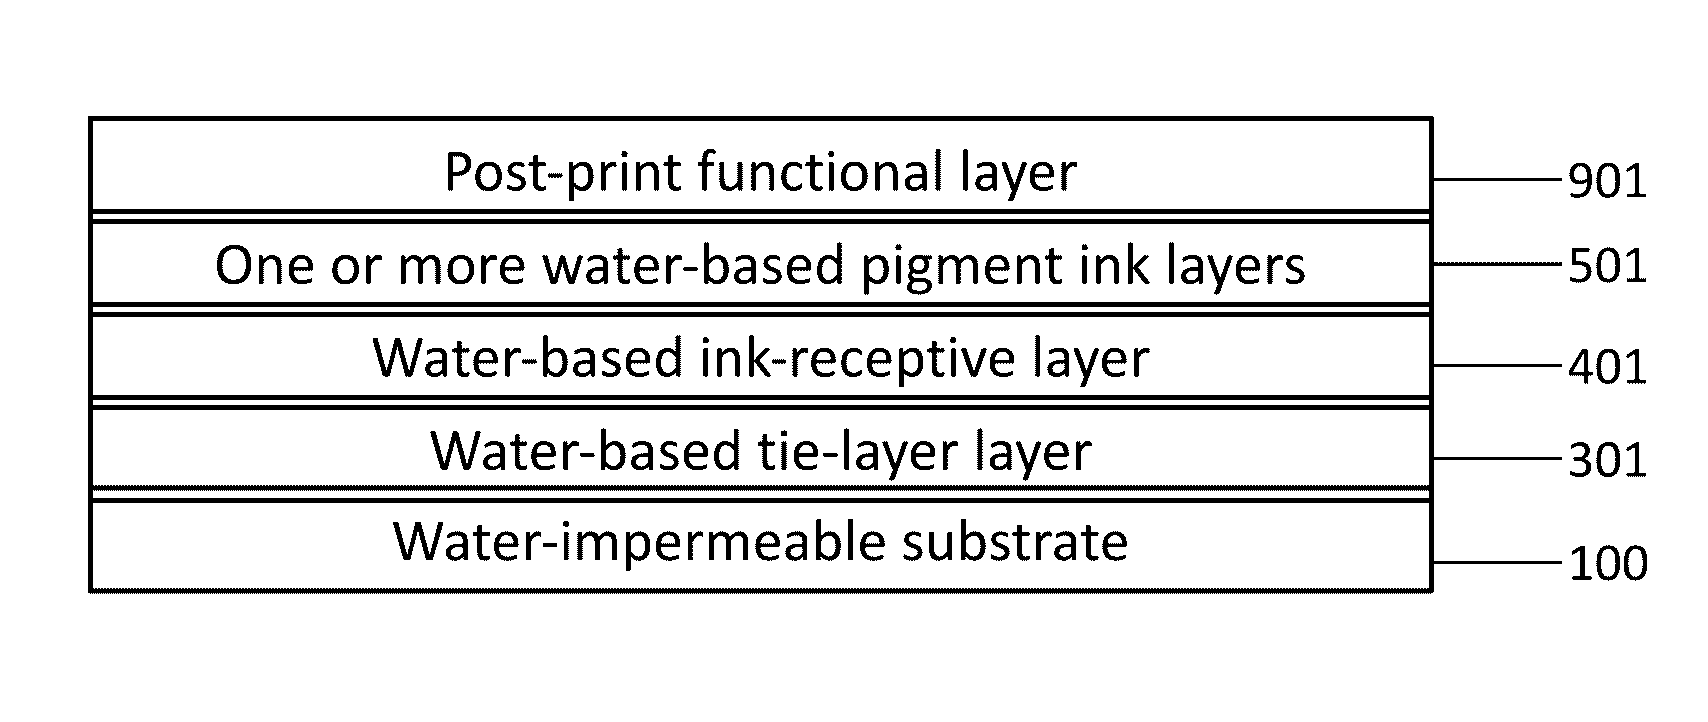 Multilayered structure with water-impermeable substrate